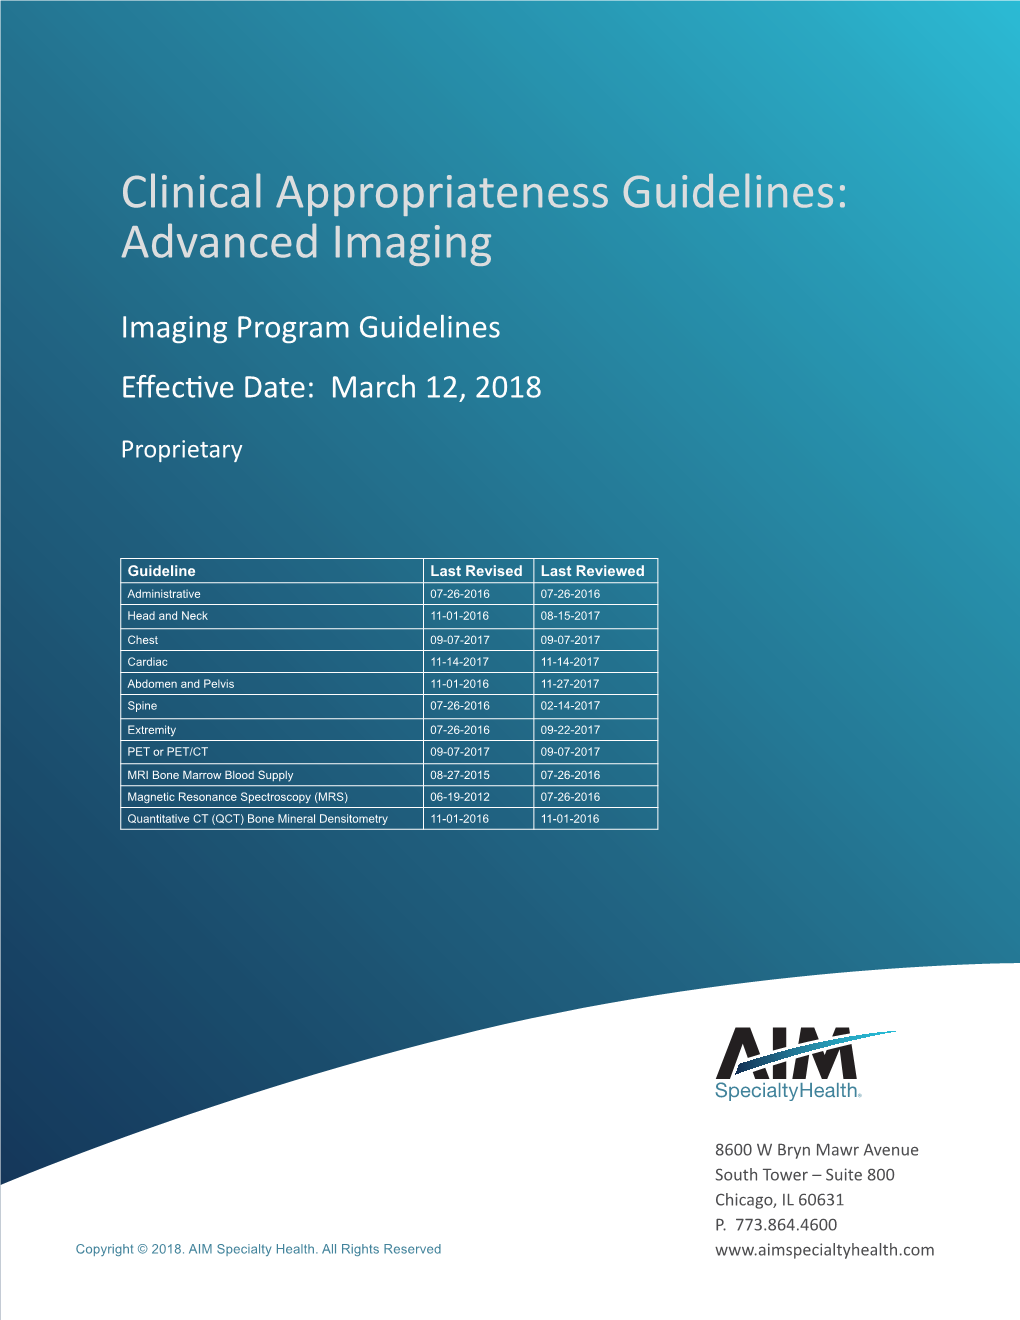 Clinical Appropriateness Guidelines: Advanced Imaging